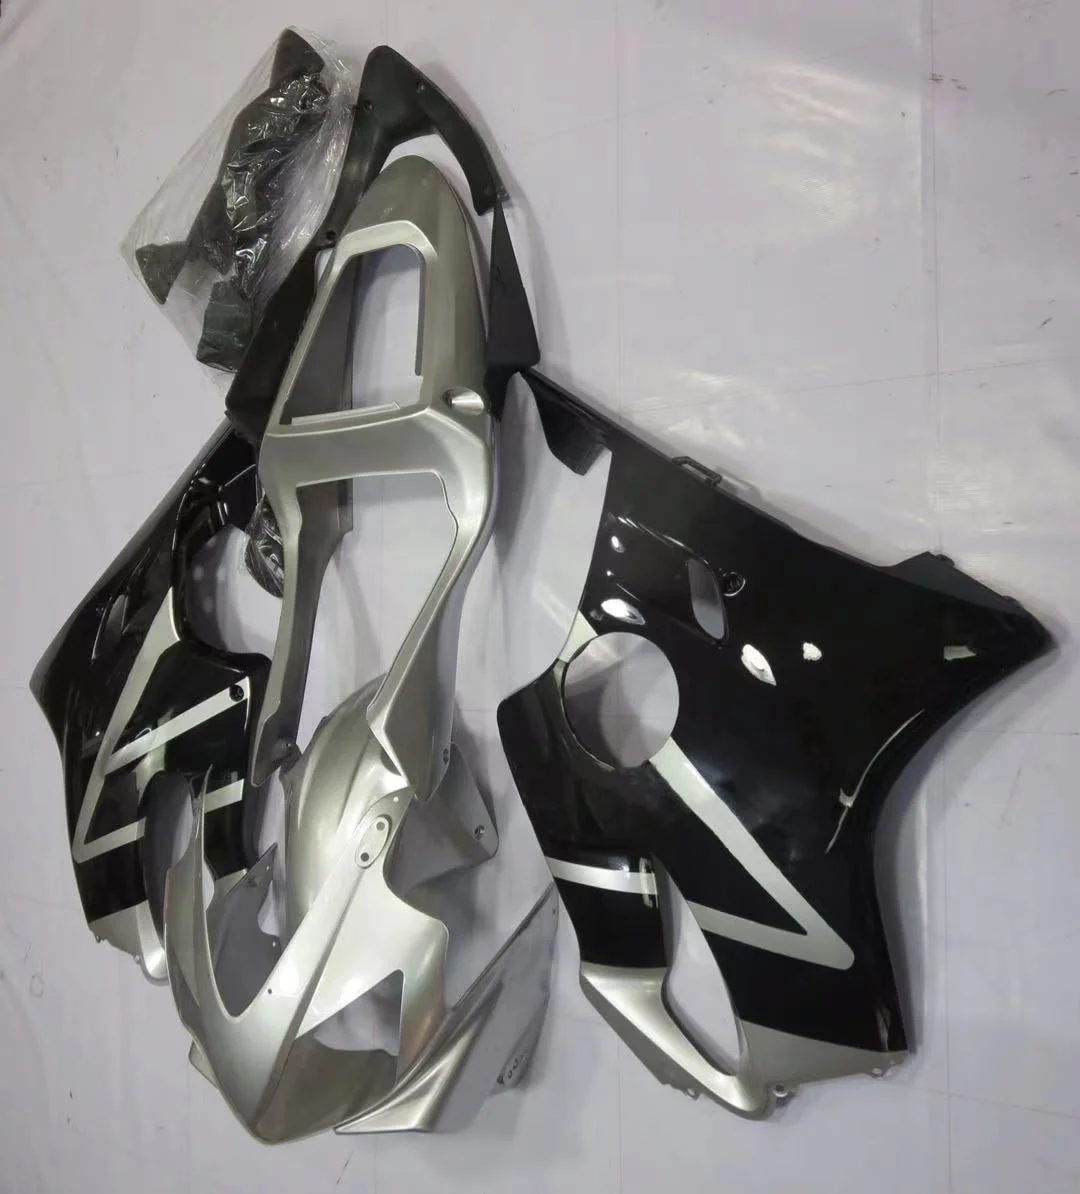 

2021 WHSC ABS Plastic Fairing Body Kit For HONDA F4I 2001-2003, Pictures shown